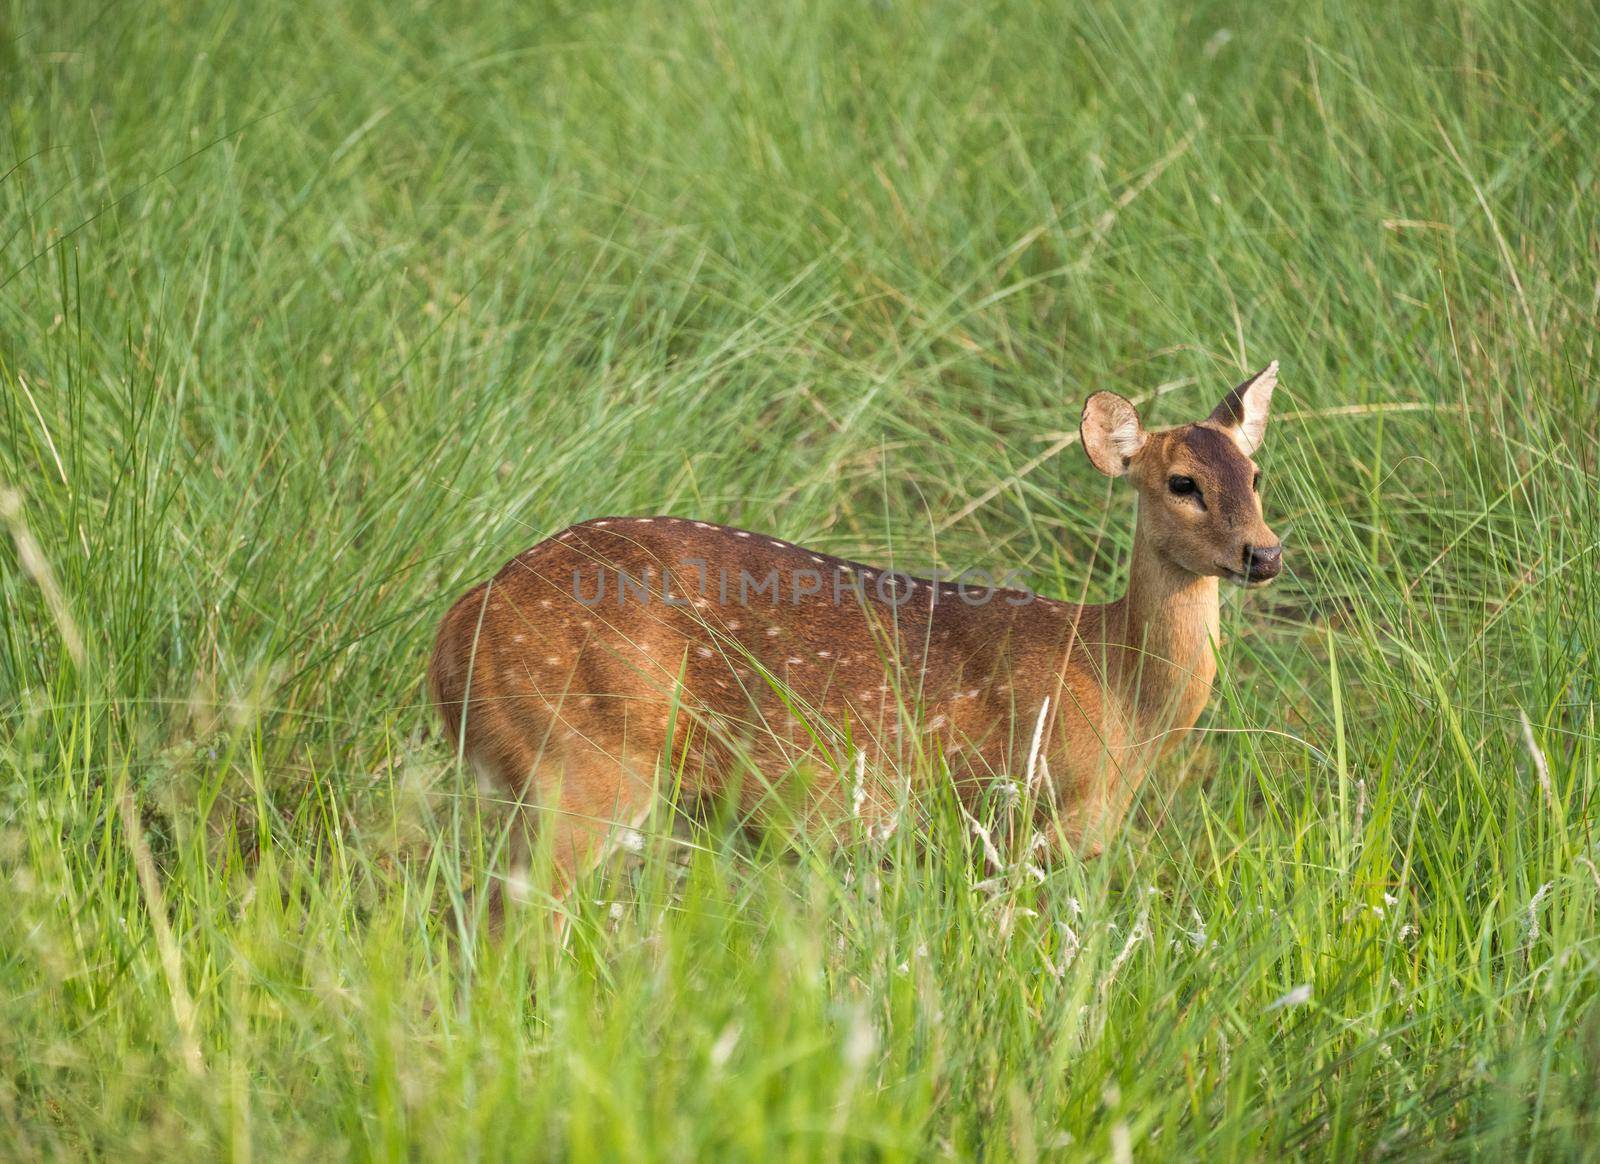 Sika or spotted deer in elephant grass tangle. Wildlife and animal photo. Japanese deer